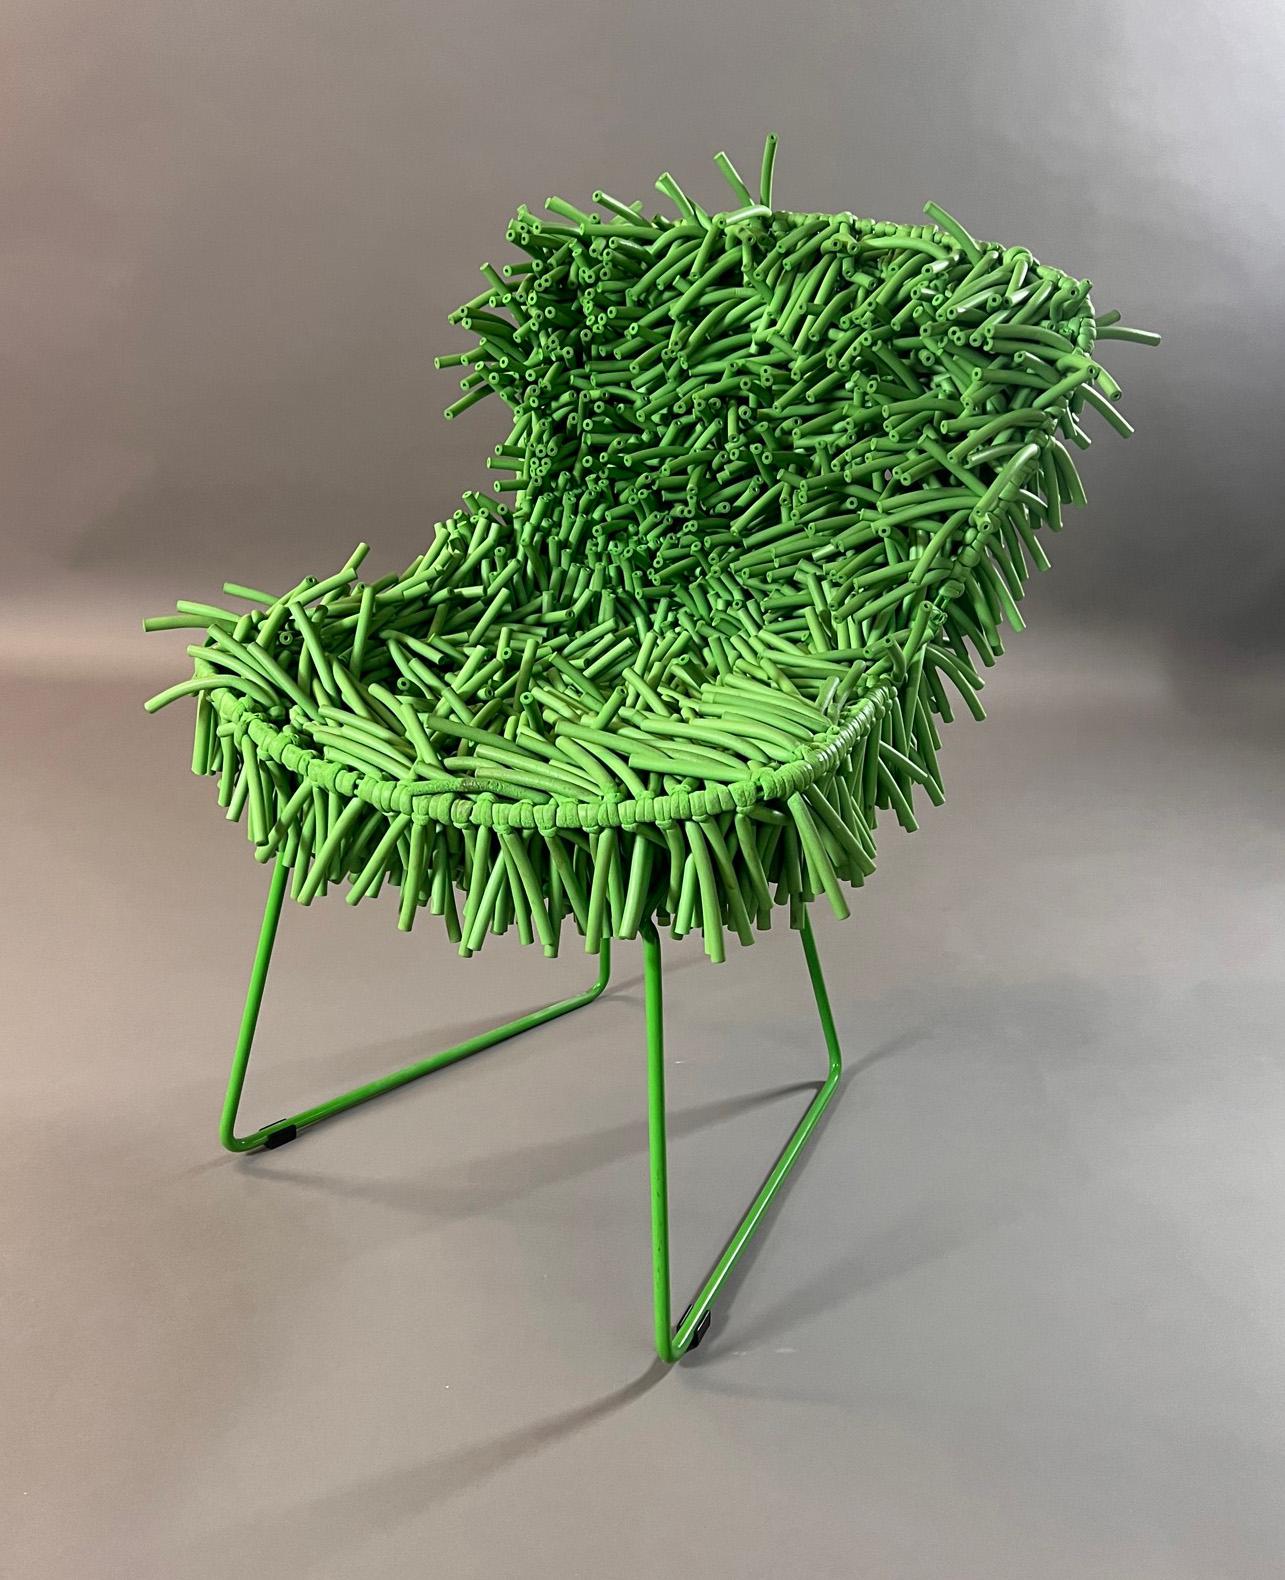 Incredible and unique iteration of an iconic modern Harry Bertoia Classic. Douglas Homer has made a special edition chair unlike anything else. In fun color and design this chair will be a statement piece in any room.